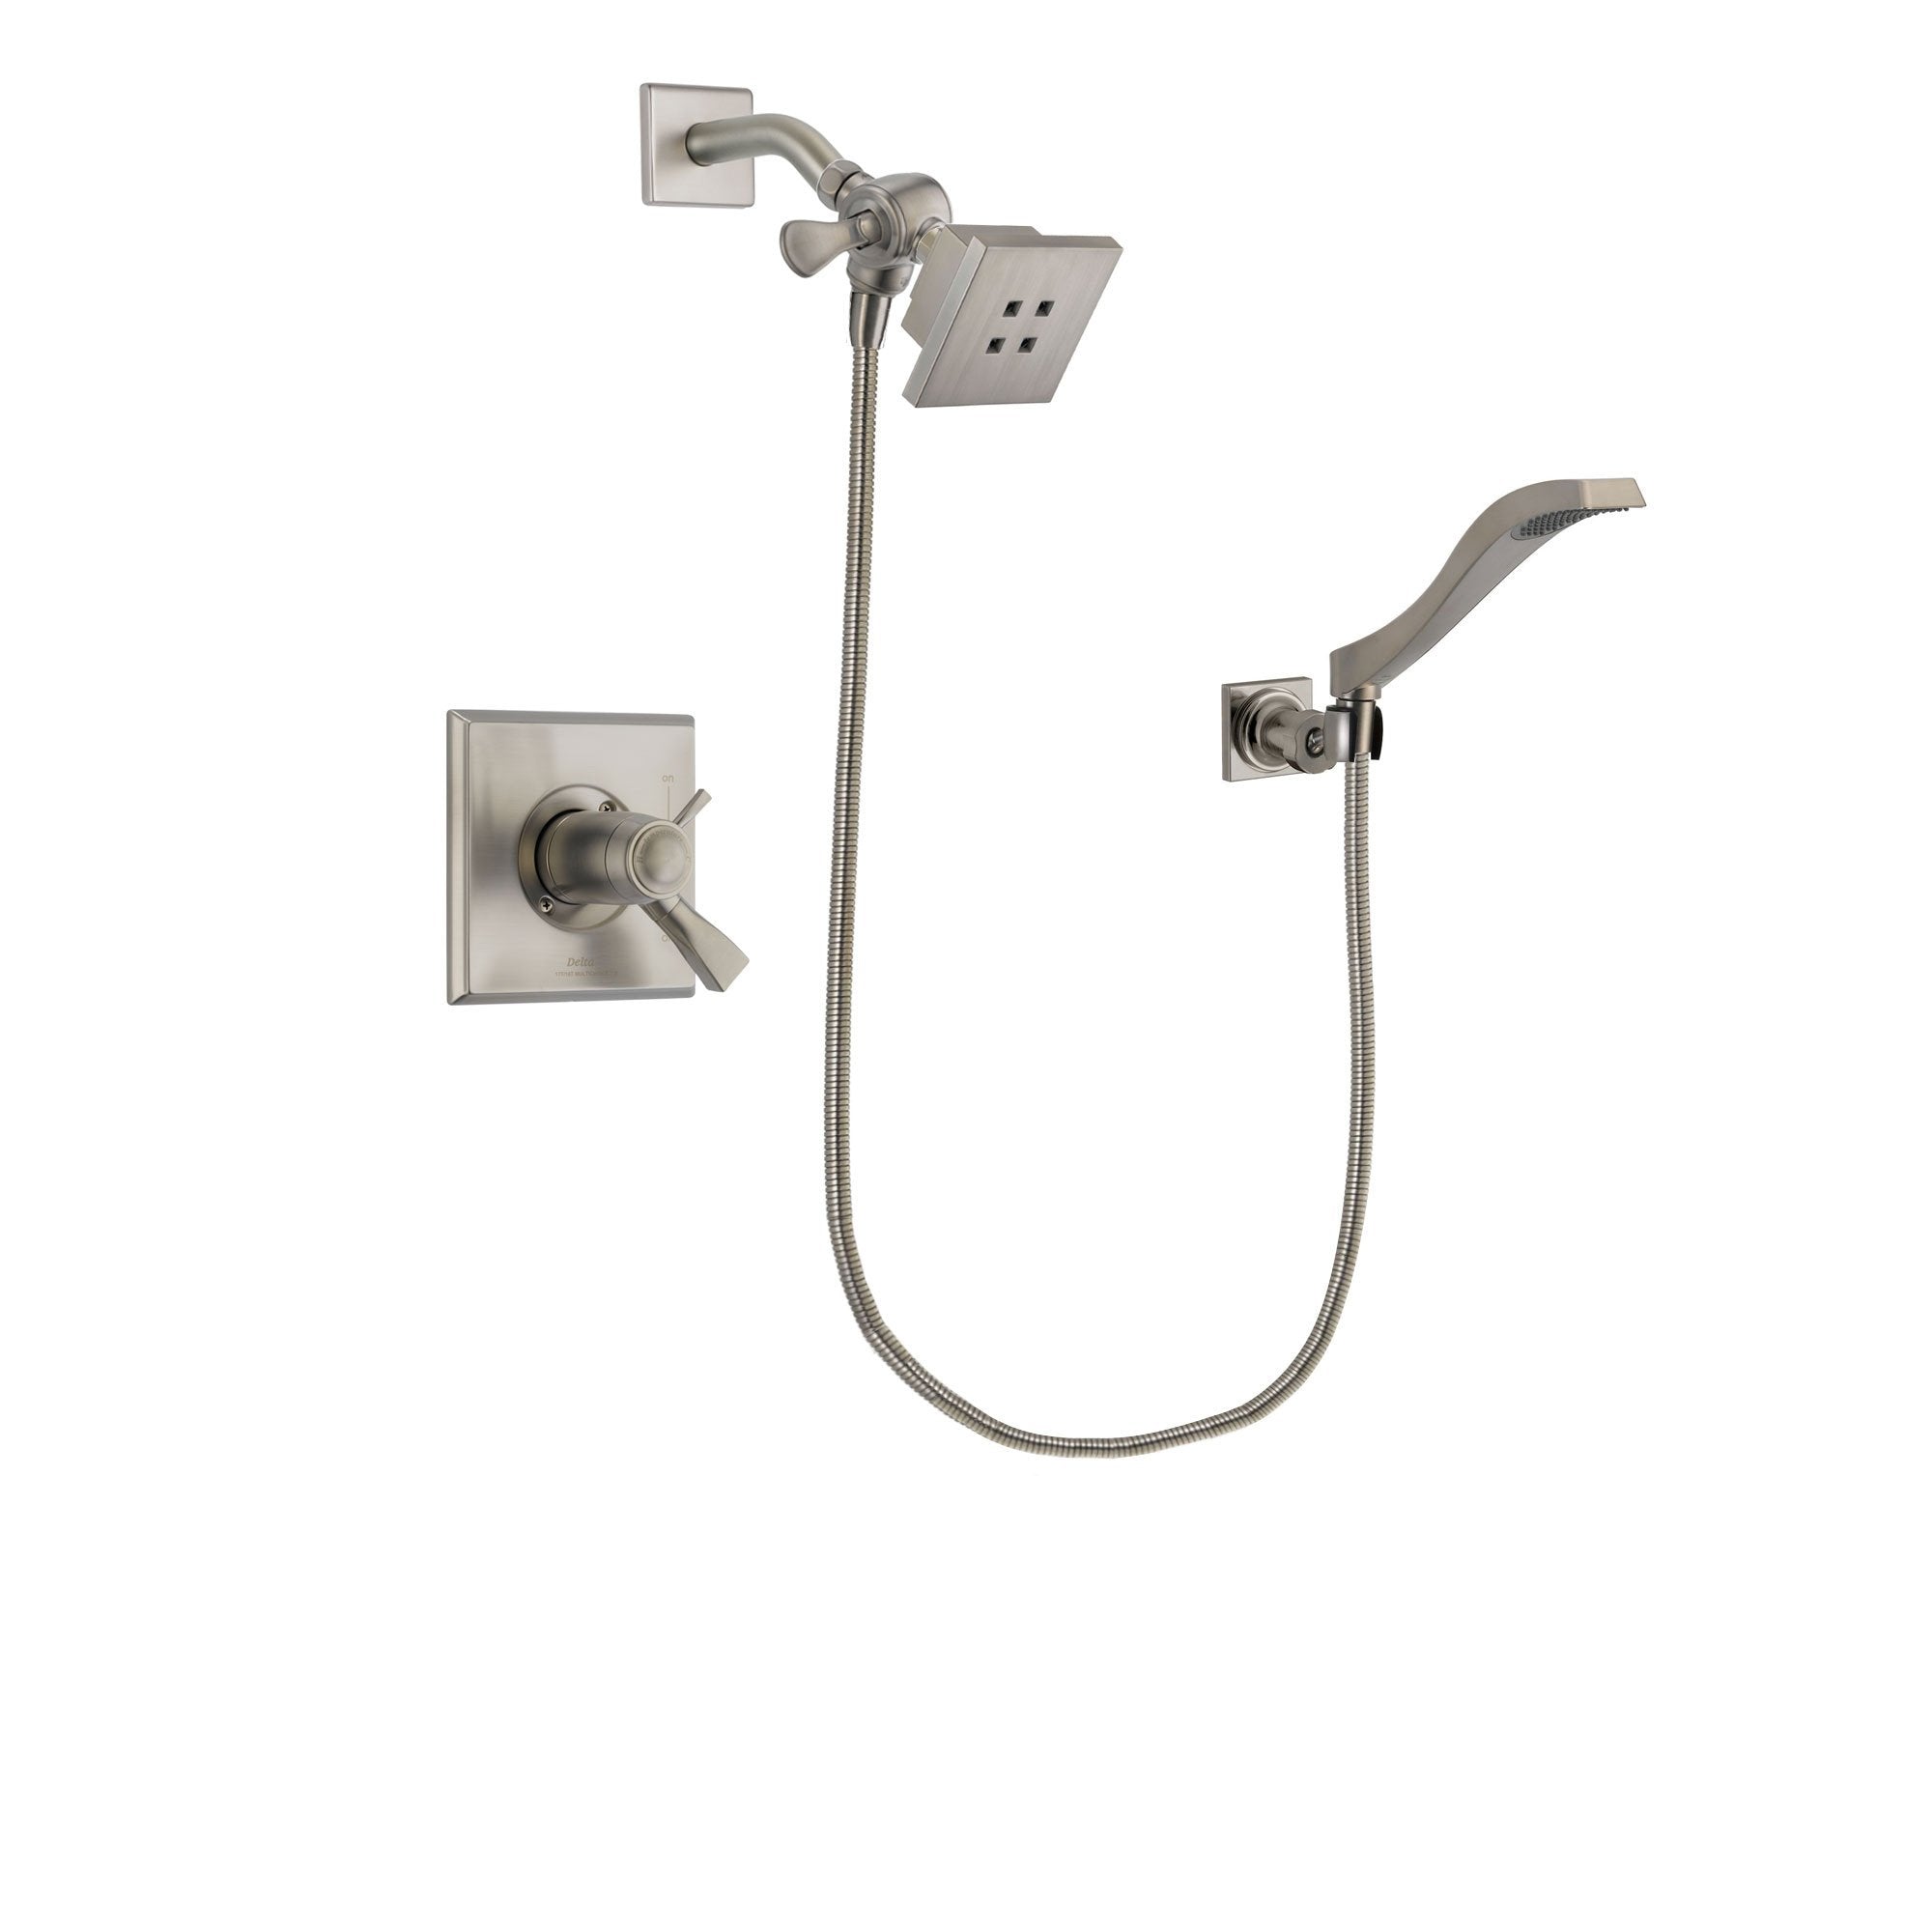 Delta Dryden Stainless Steel Finish Thermostatic Shower Faucet System Package with Square Showerhead and Modern Wall Mount Handheld Shower Spray Includes Rough-in Valve DSP2058V